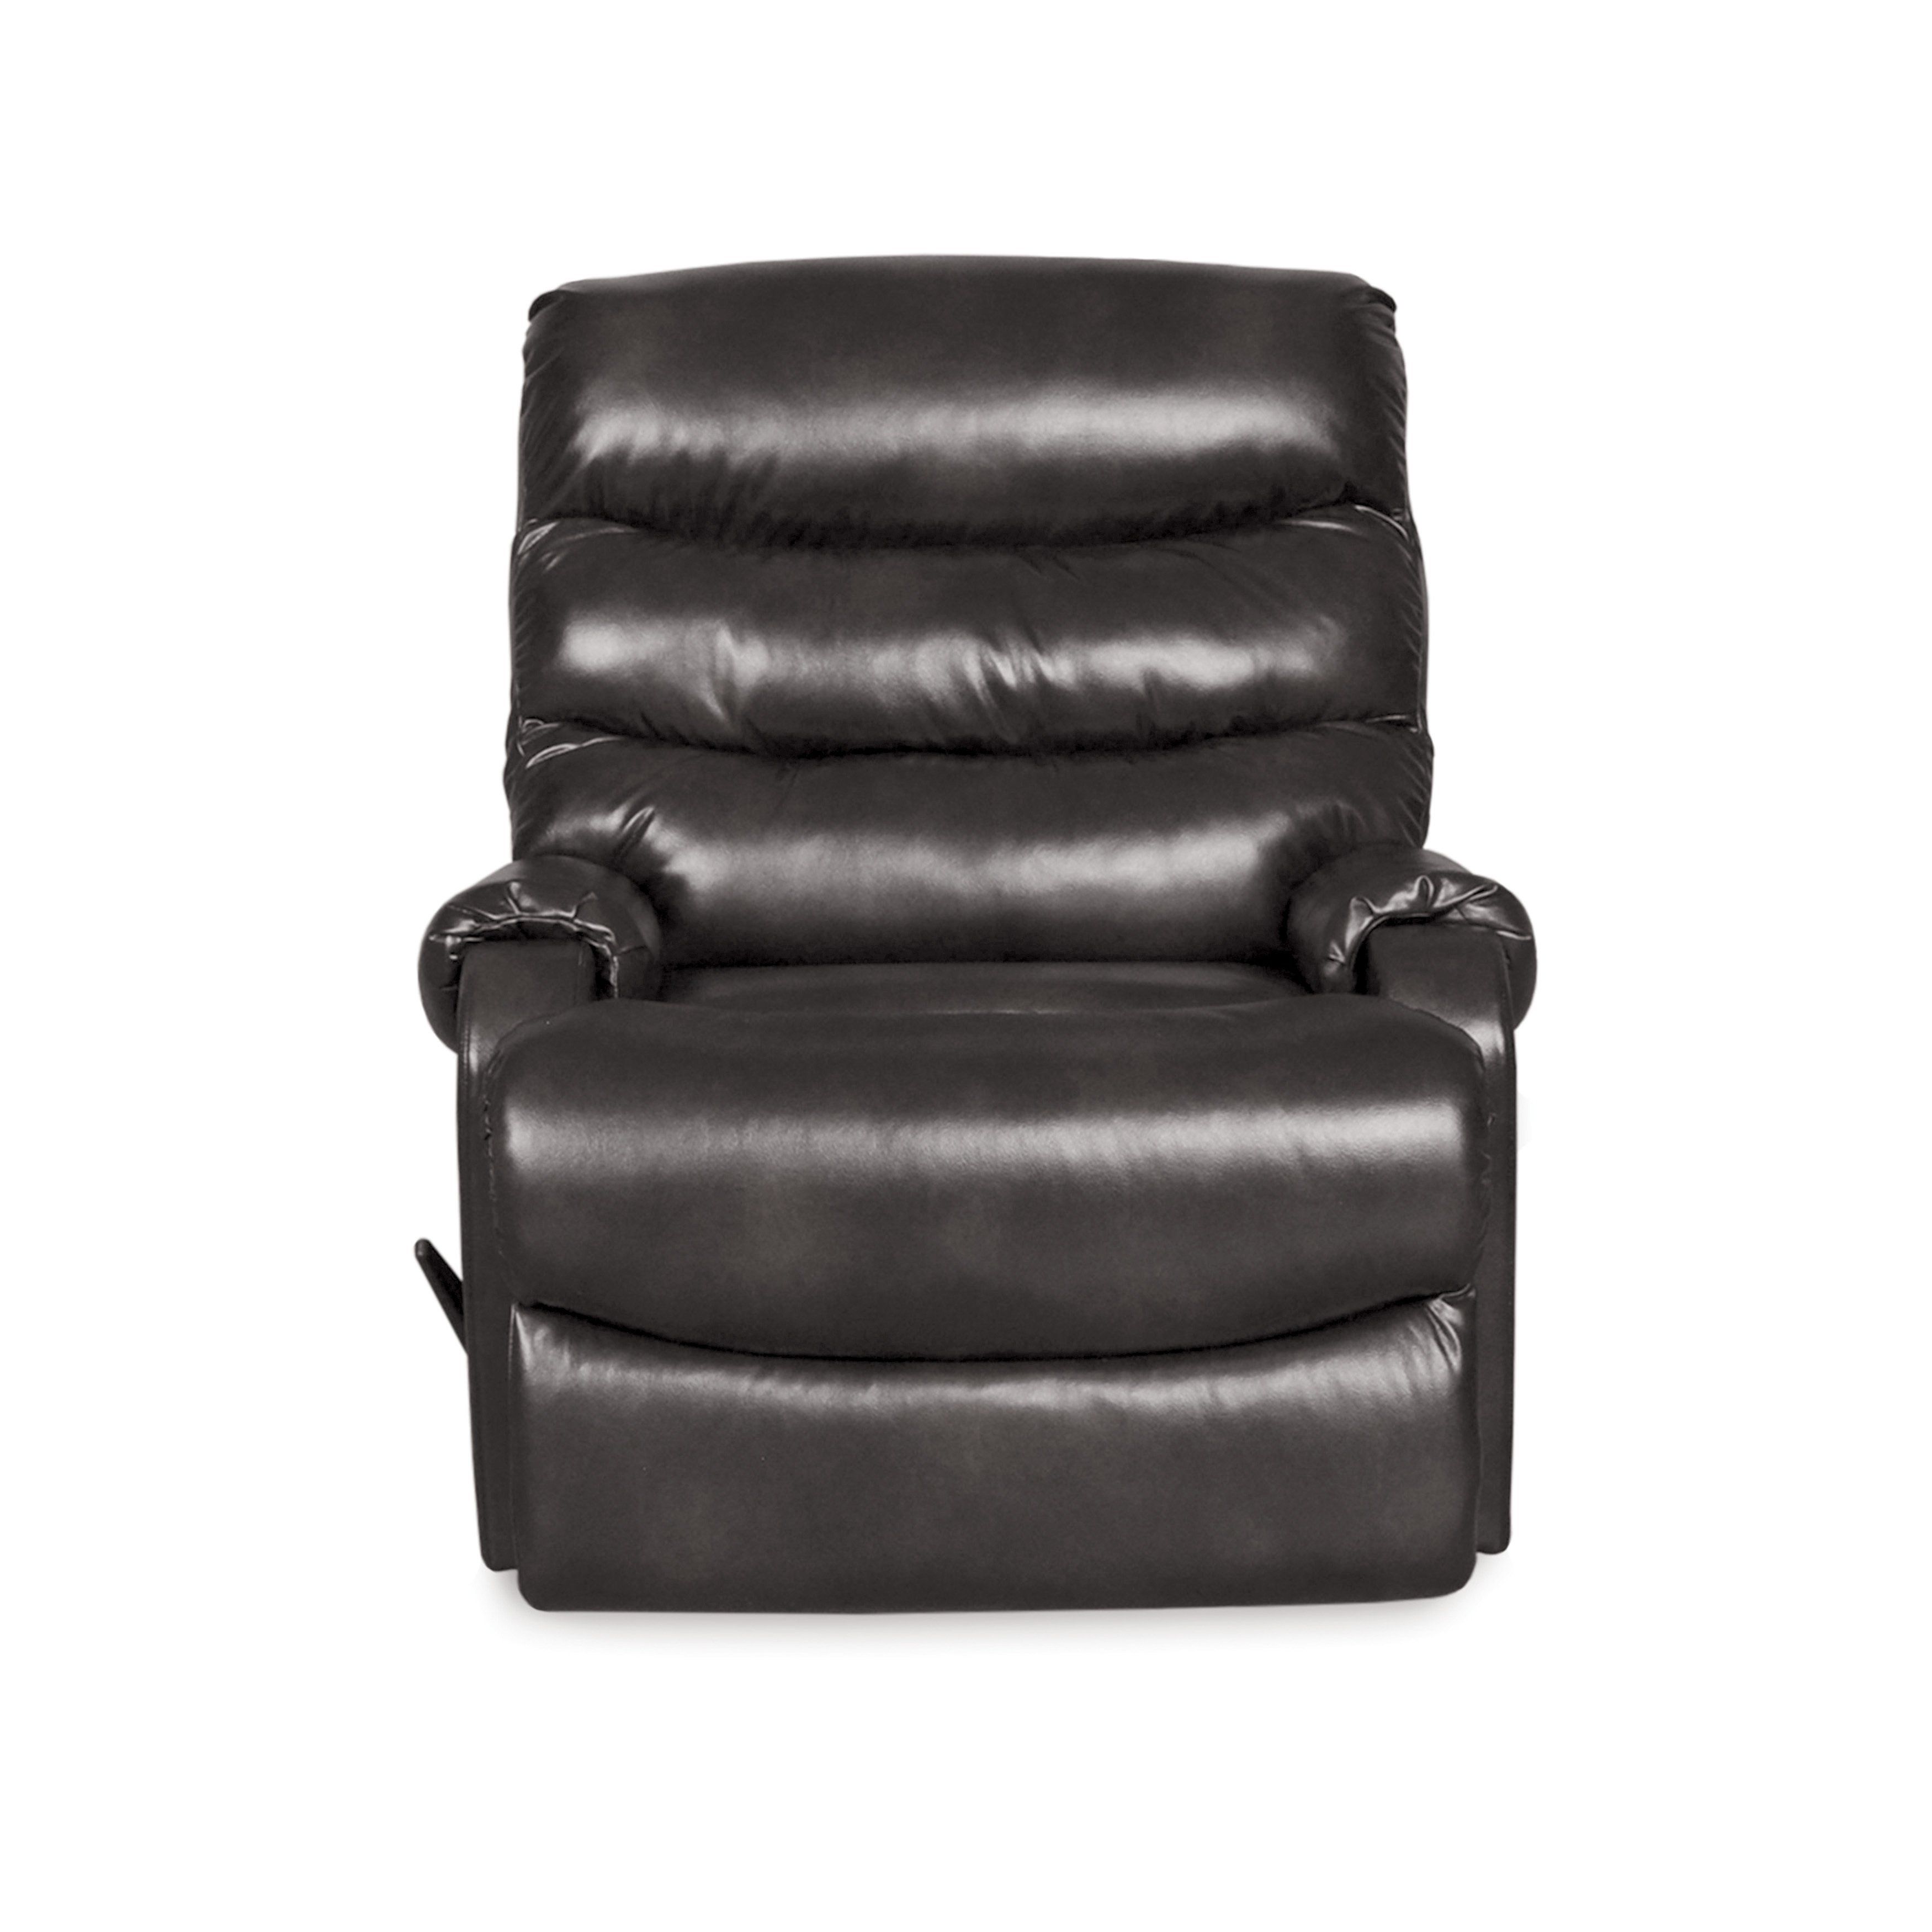 Shop Bailey Glider Recliner – Free Shipping Today – Overstock Pertaining To Gannon Truffle Power Swivel Recliners (View 7 of 20)